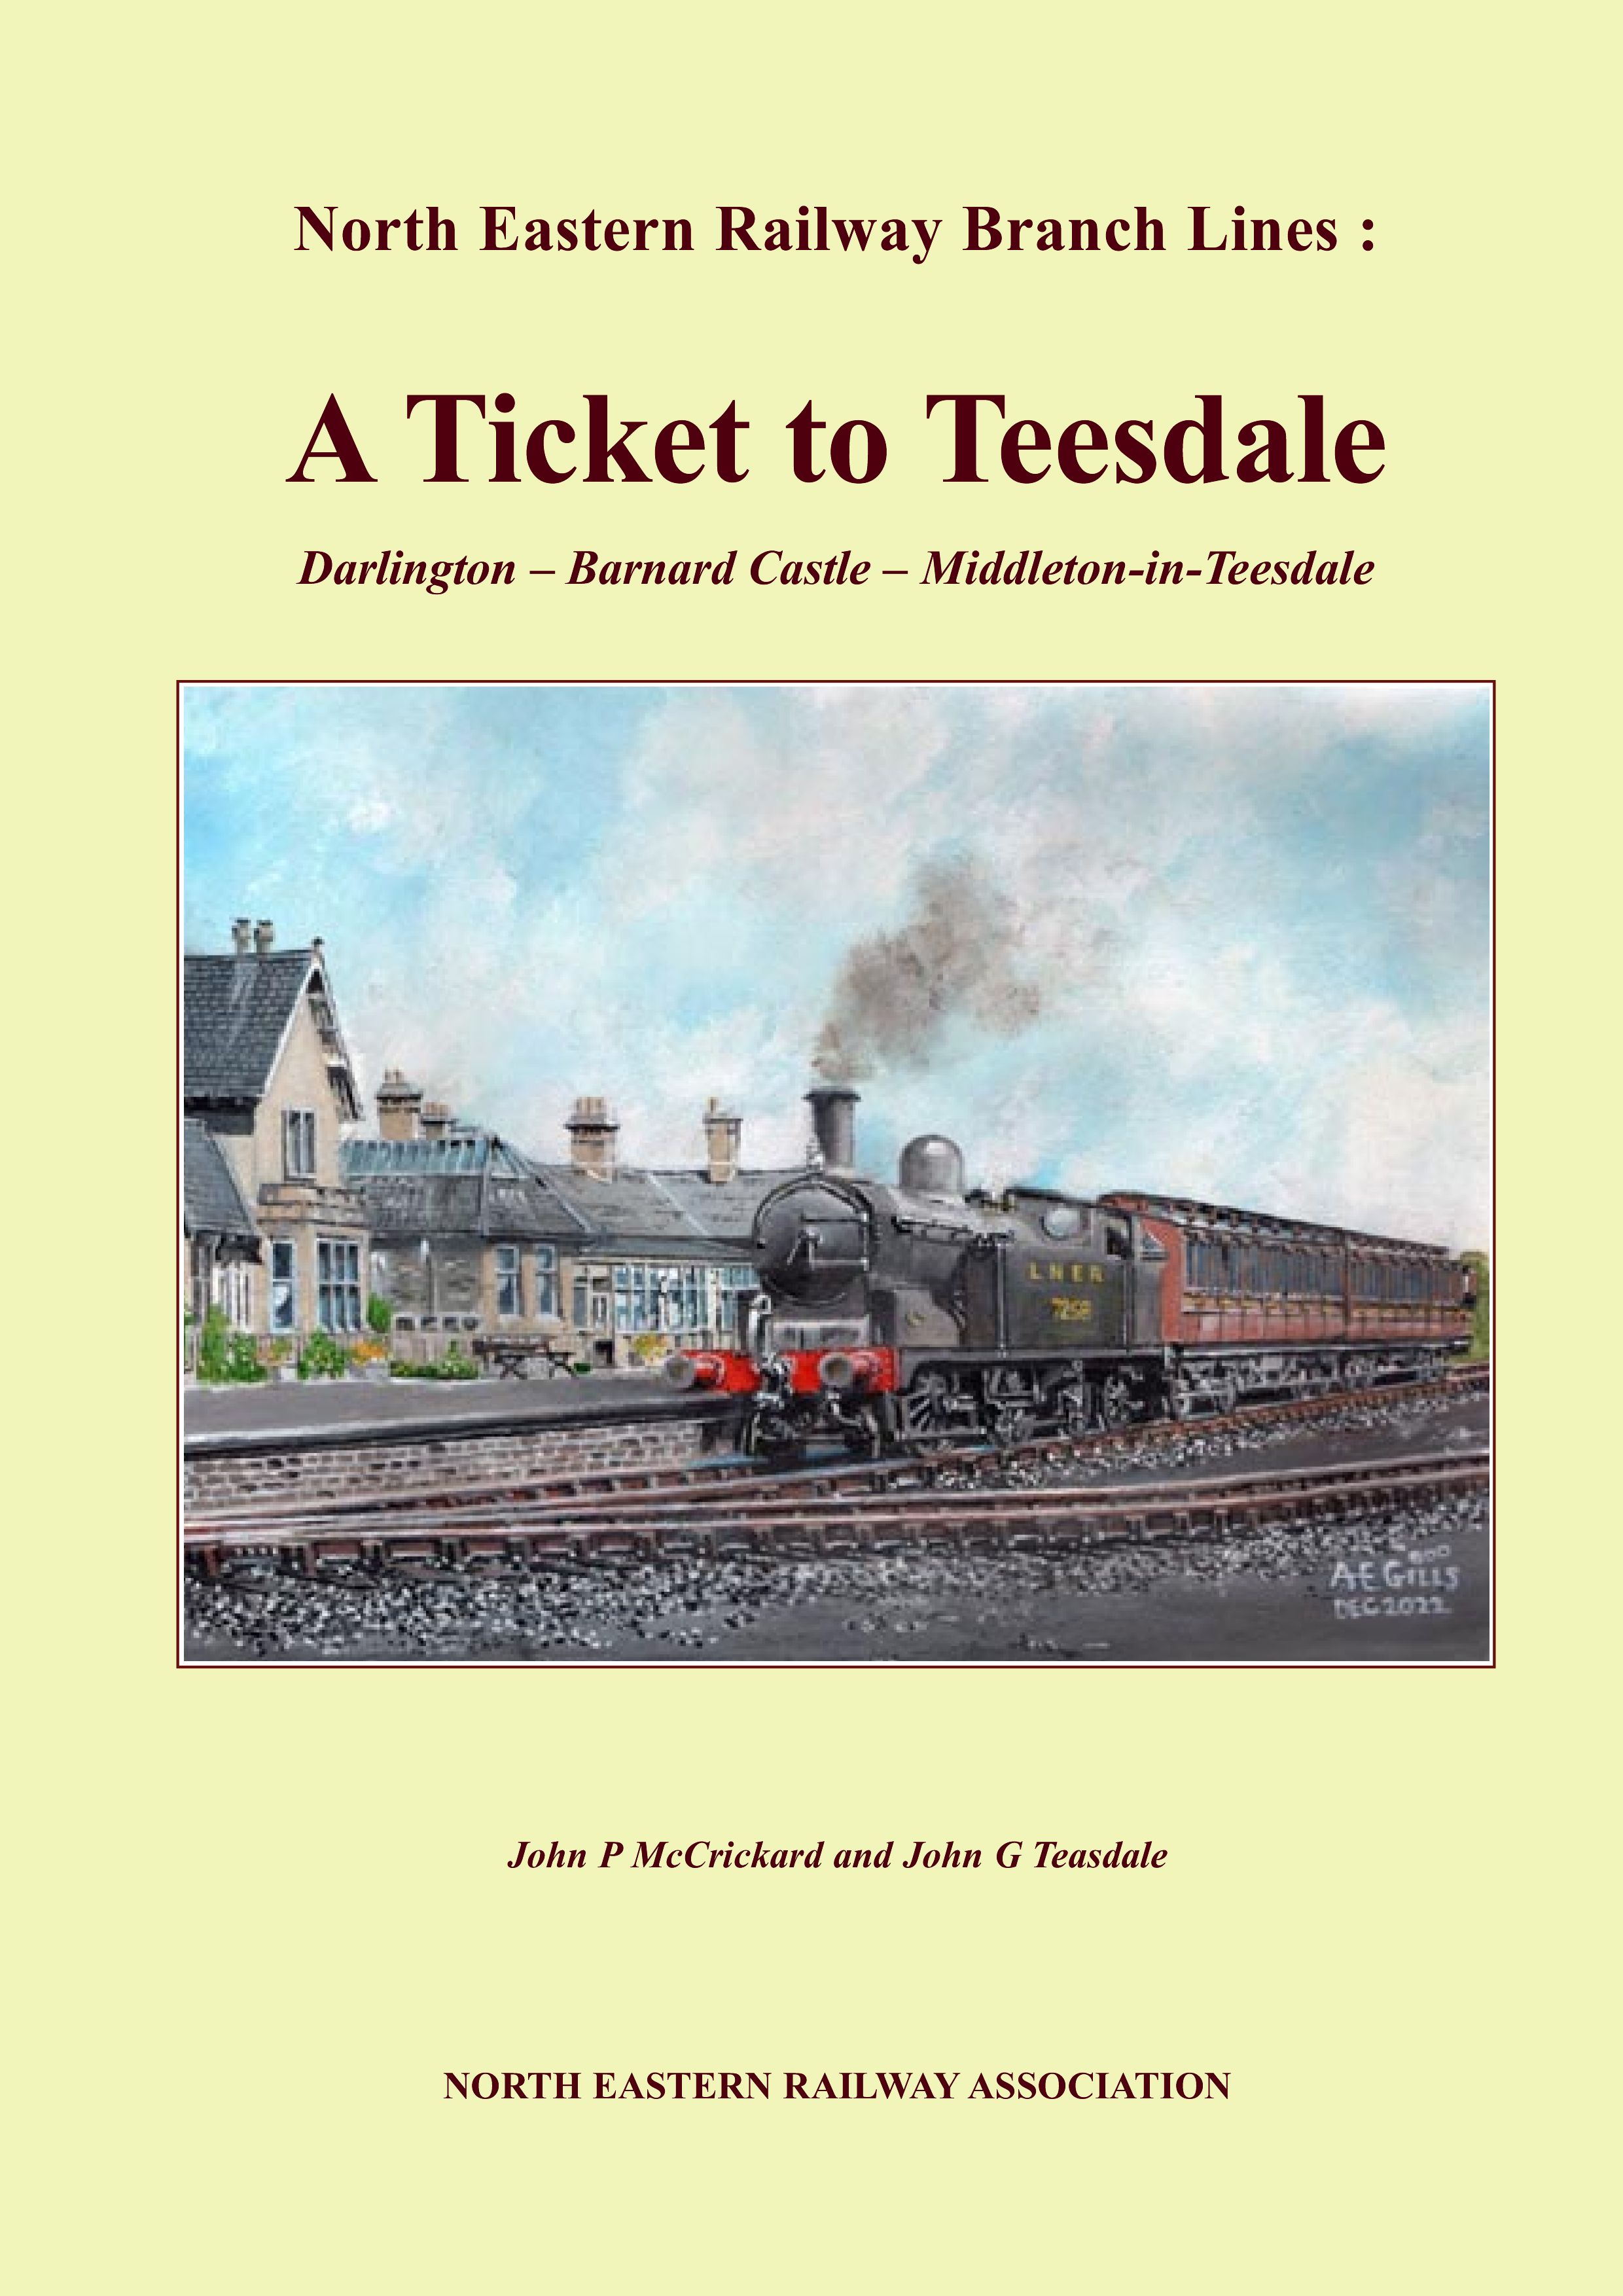 North Eastern Railway Branch Lines: A Ticket to Teesdale Darlington – Barnard Castle – Middleton - in - Teesdale